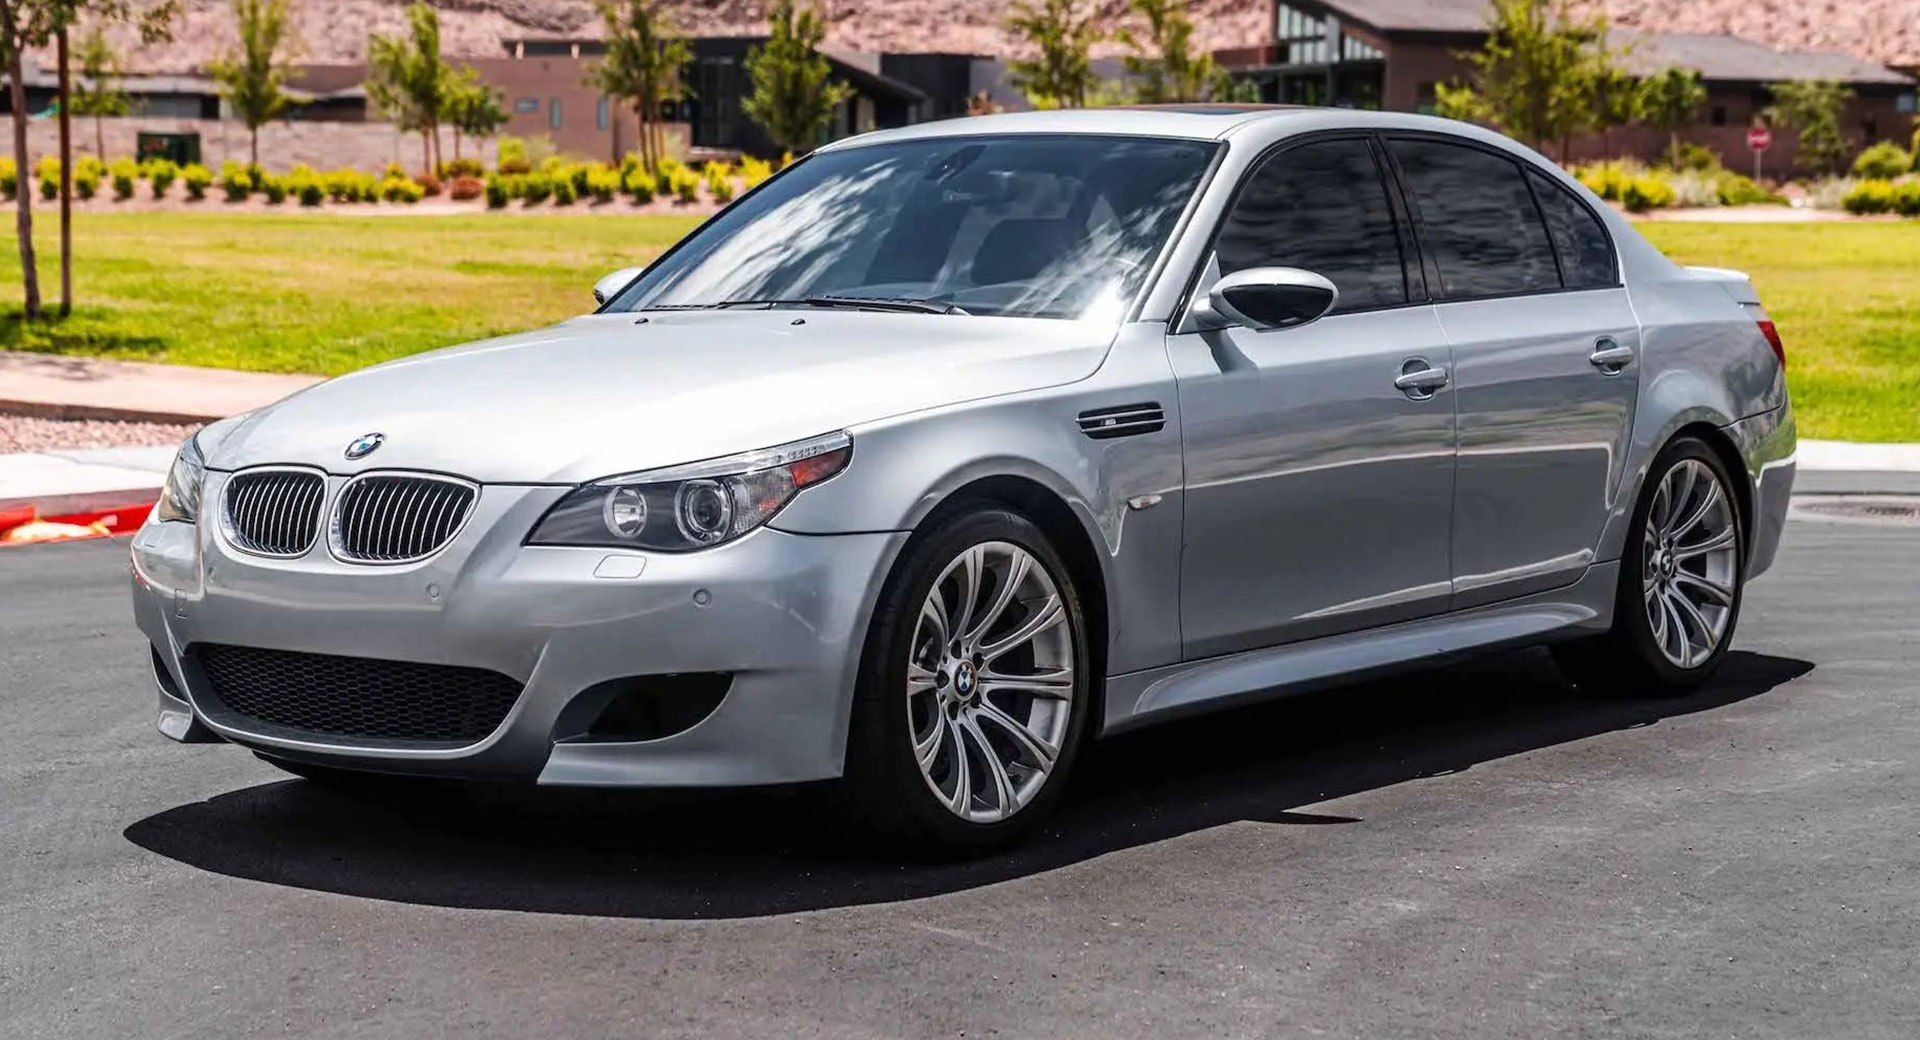 Buying This Bmw M5 Will Get You One Of The Last Great V10S | Carscoops